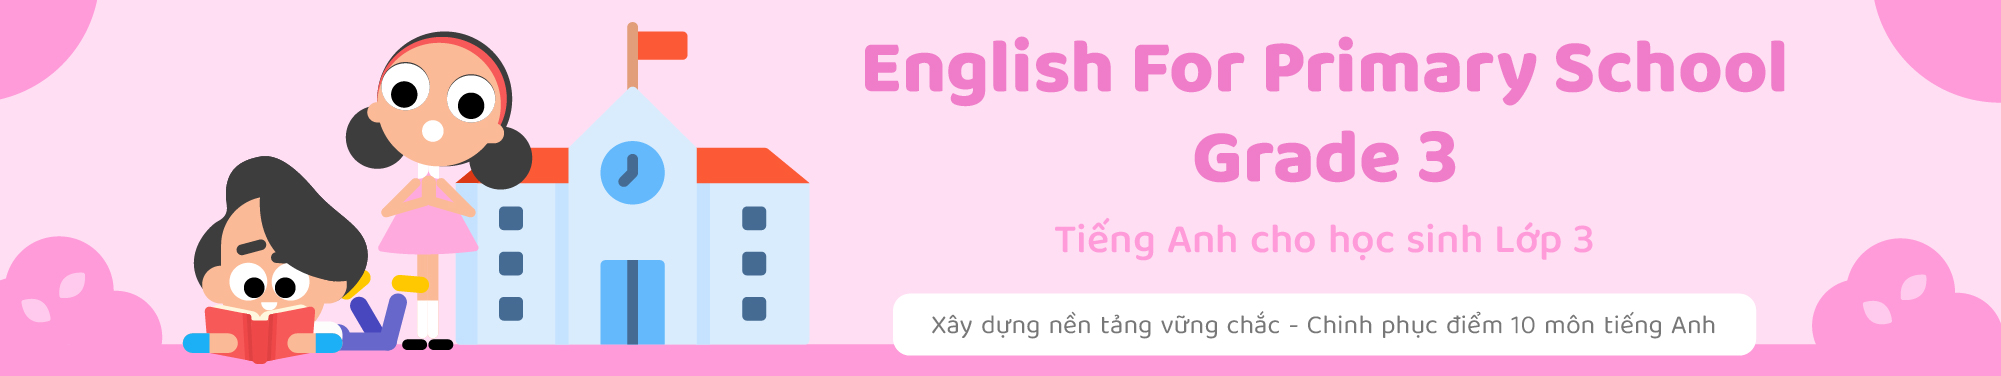 English for Primary School Grade 3 banner